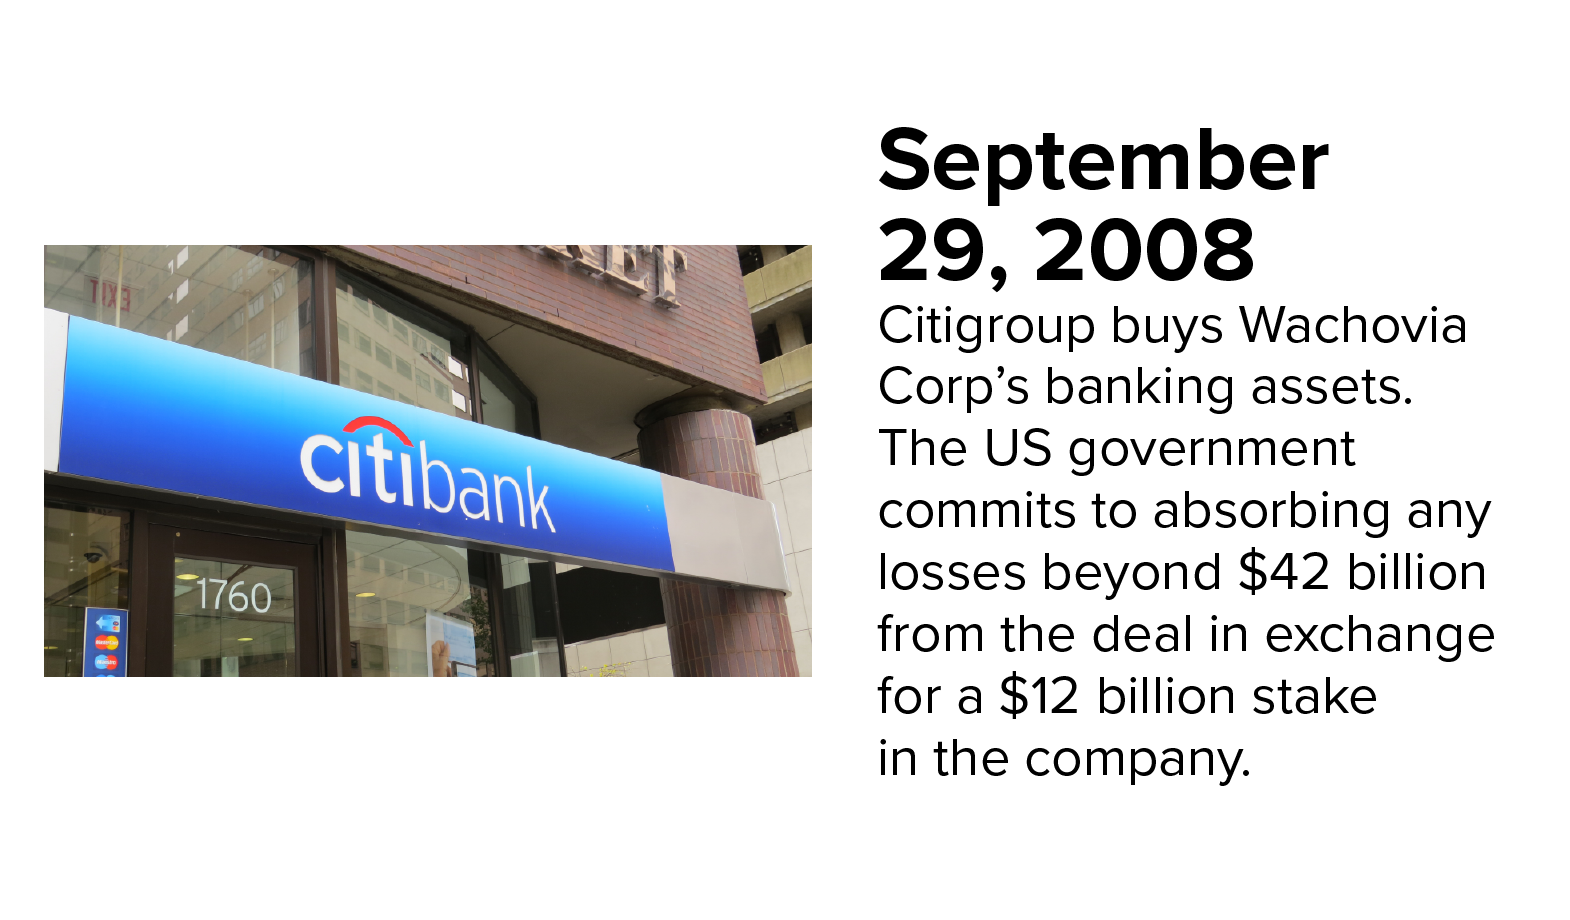 Photo of Citibank sign. Citibank bought Wachovia’s banking assets in September 2008. 